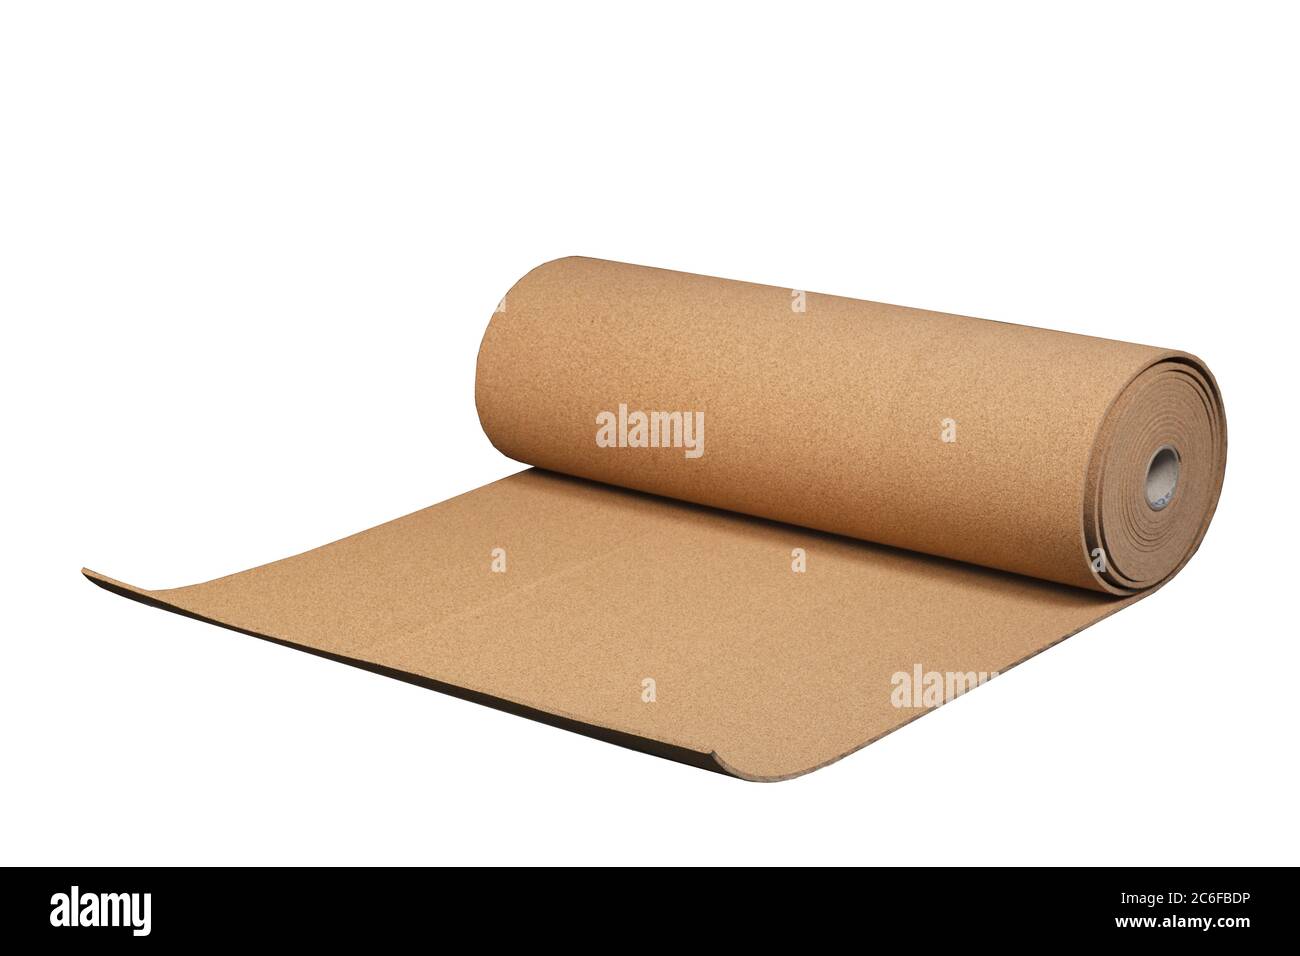 Cork underlay for laminate flooring. Cork base for wooden floors and coatings in the interior. Stock Photo